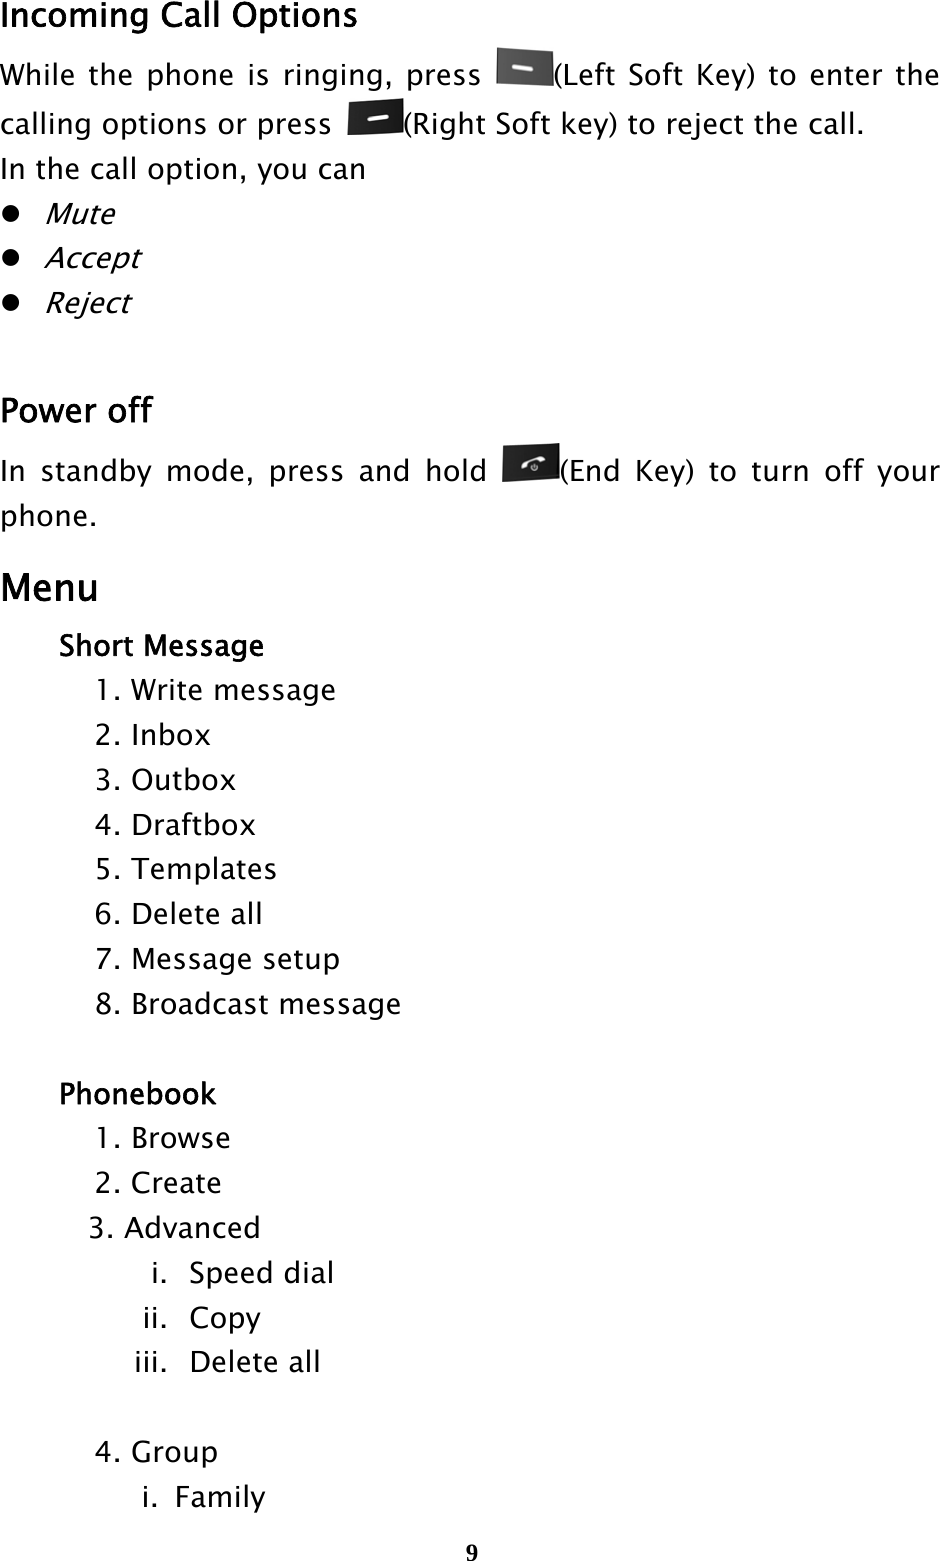  9Incoming Call Options   While the phone is ringing, press  (Left Soft Key) to enter the calling options or press  (Right Soft key) to reject the call.   In the call option, you can  Mute  Accept  Reject  Power off In standby mode, press and hold  (End Key) to turn off your phone. Menu   Short Message   1. Write message   2. Inbox   3. Outbox   4. Draftbox   5. Templates     6. Delete all     7. Message setup     8. Broadcast message      Phonebook   1. Browse   2. Create 3. Advanced i.  Speed dial ii.  Copy iii.  Delete all     4. Group i. Family                                           